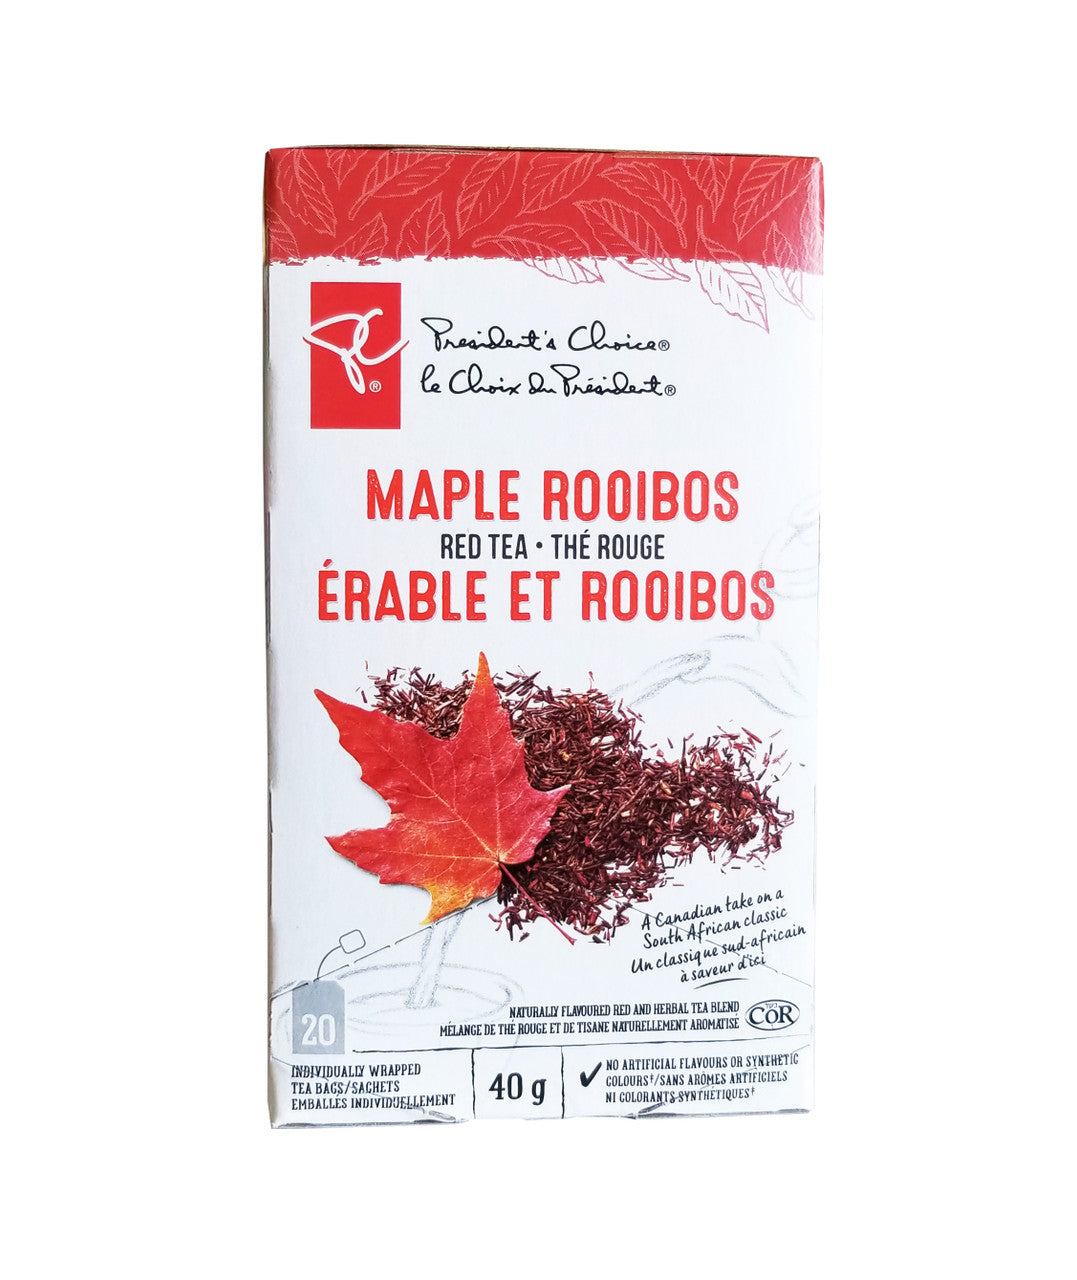 President's Choice Maple Rooibos Red Tea 20ct, 40g/1.4 oz., Box {Imported from Canada}